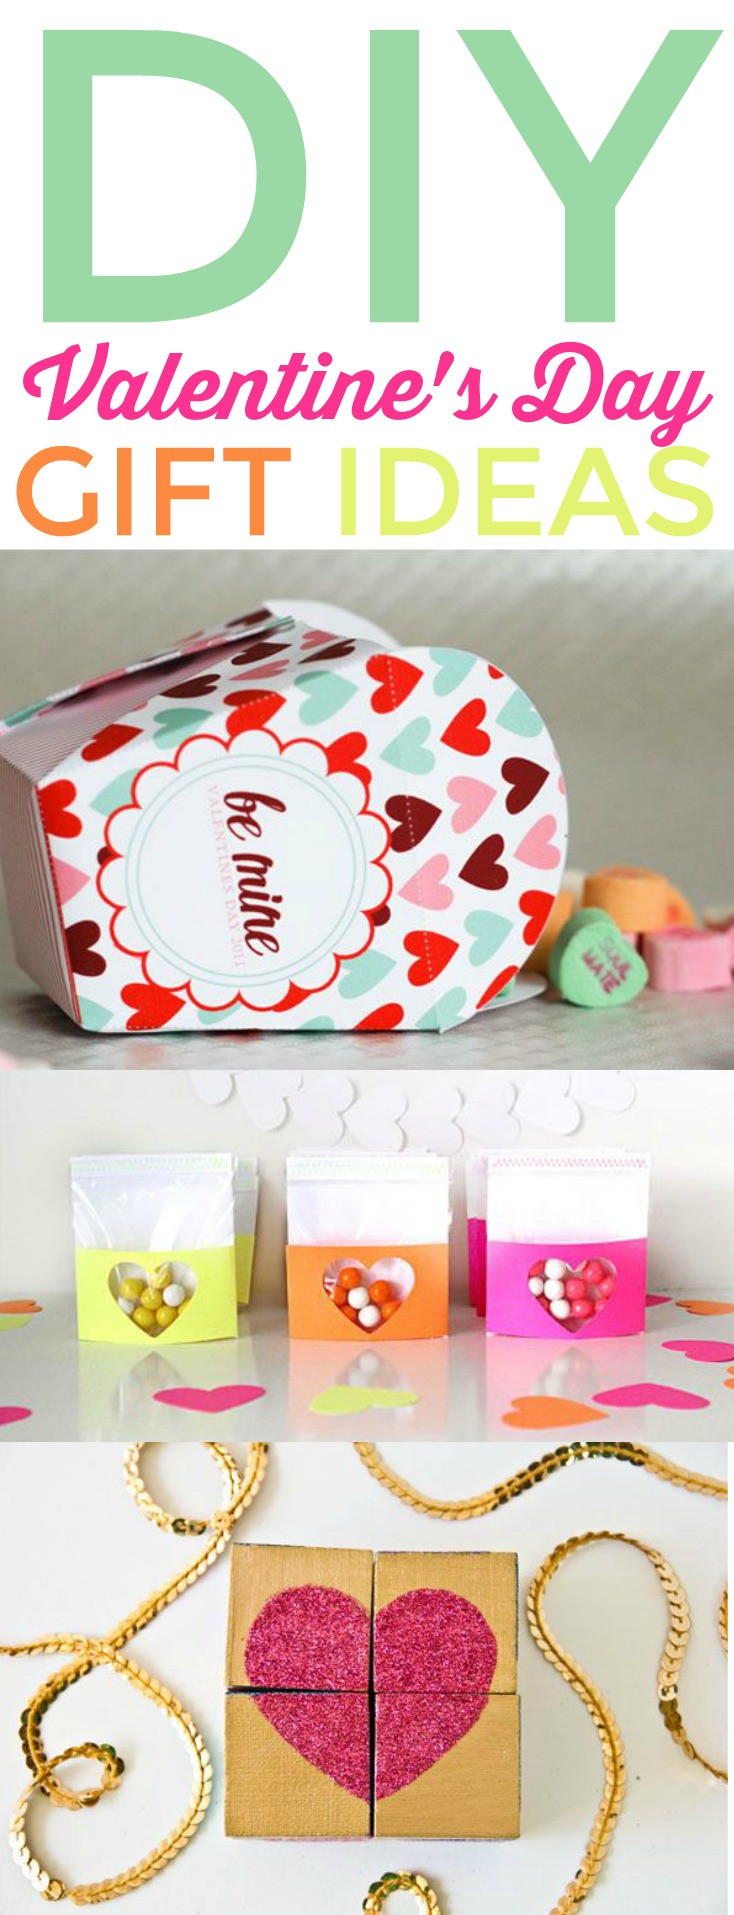 Diy Valentine Day Gift Ideas
 DIY Valentines Day Gift Ideas A Little Craft In Your Day